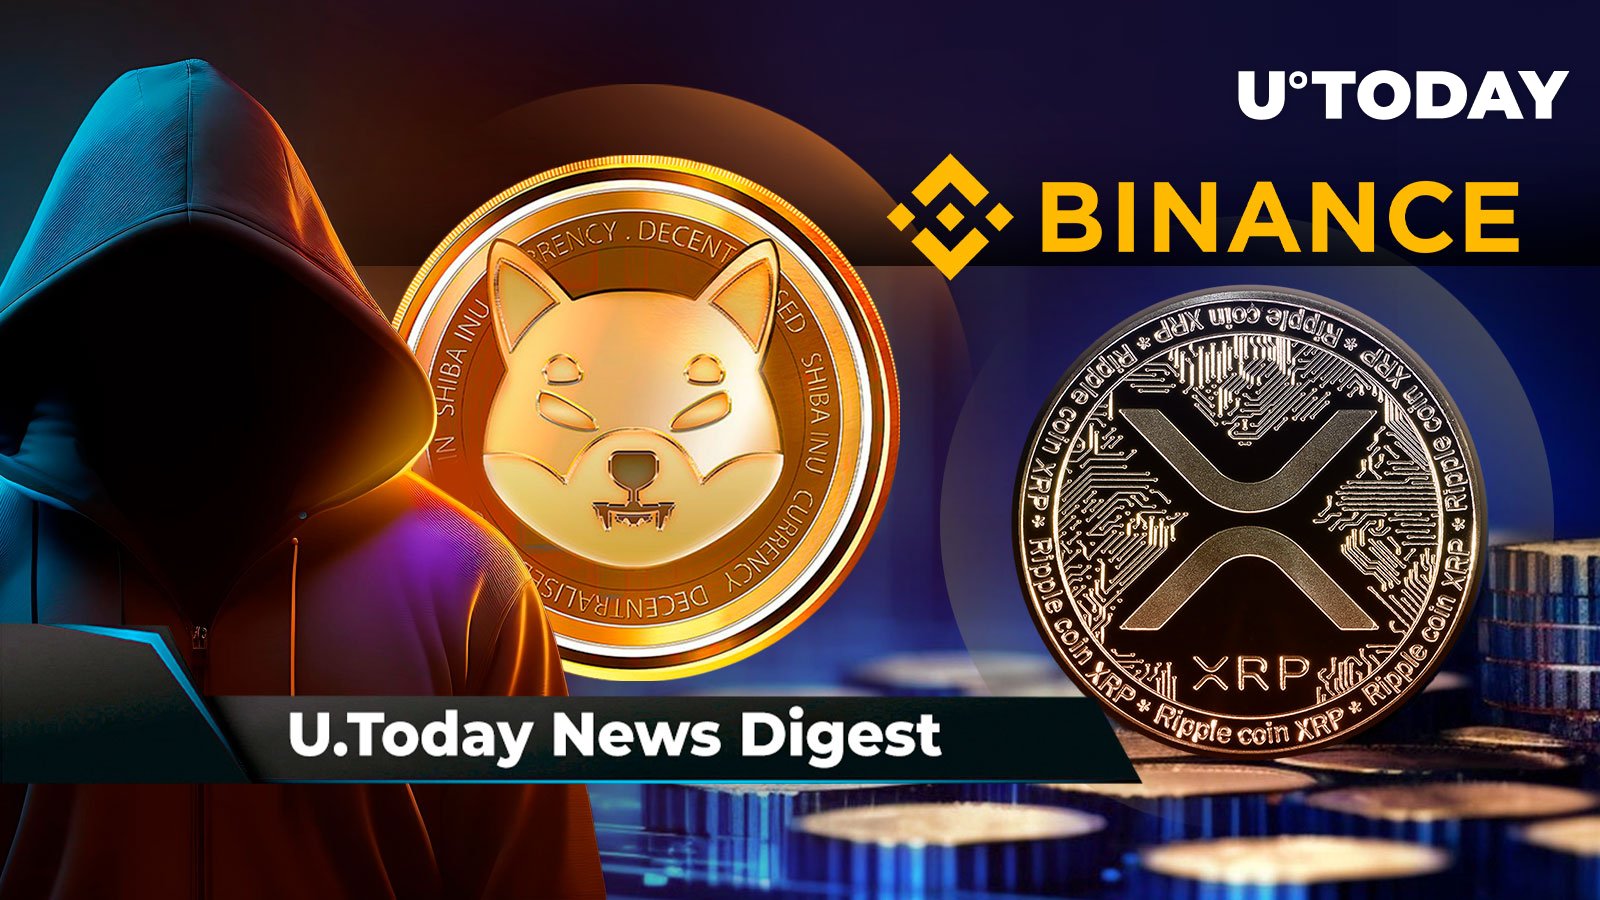 SHIB’s Goal to ‘Finish Everything’ by End of 2024, Binance Freezes Stolen XRP Tokens, Anon Whale Moves 8 Million in Bitcoin to PayPal: Crypto News Digest by U.Today